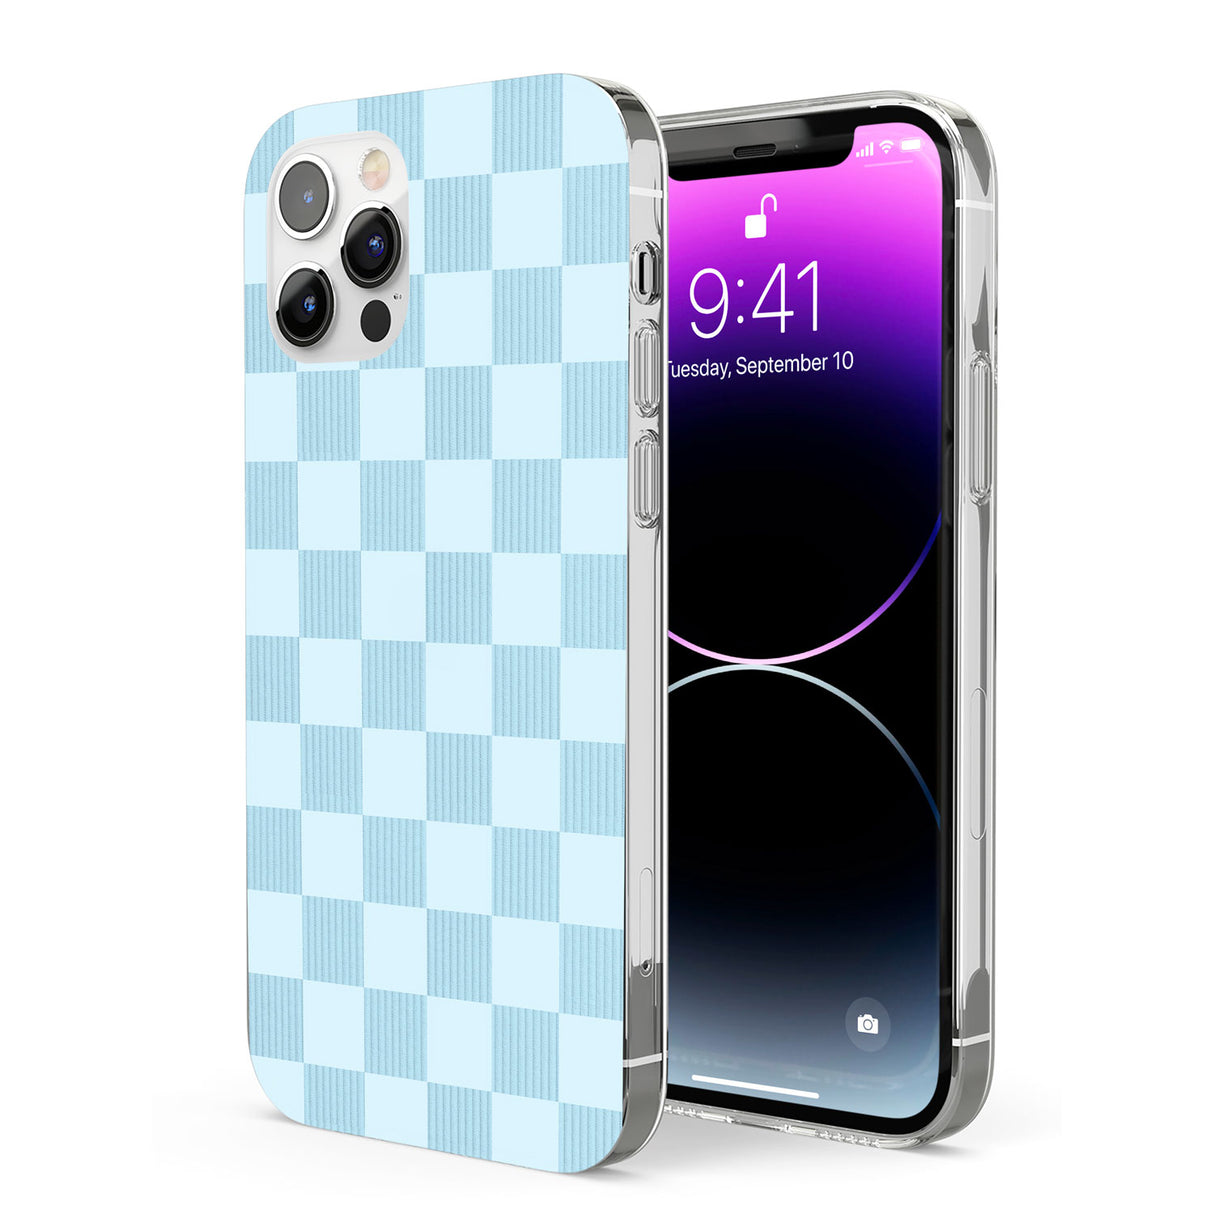 SKYBLUE CHECKERED Phone Case for iPhone 12 Pro